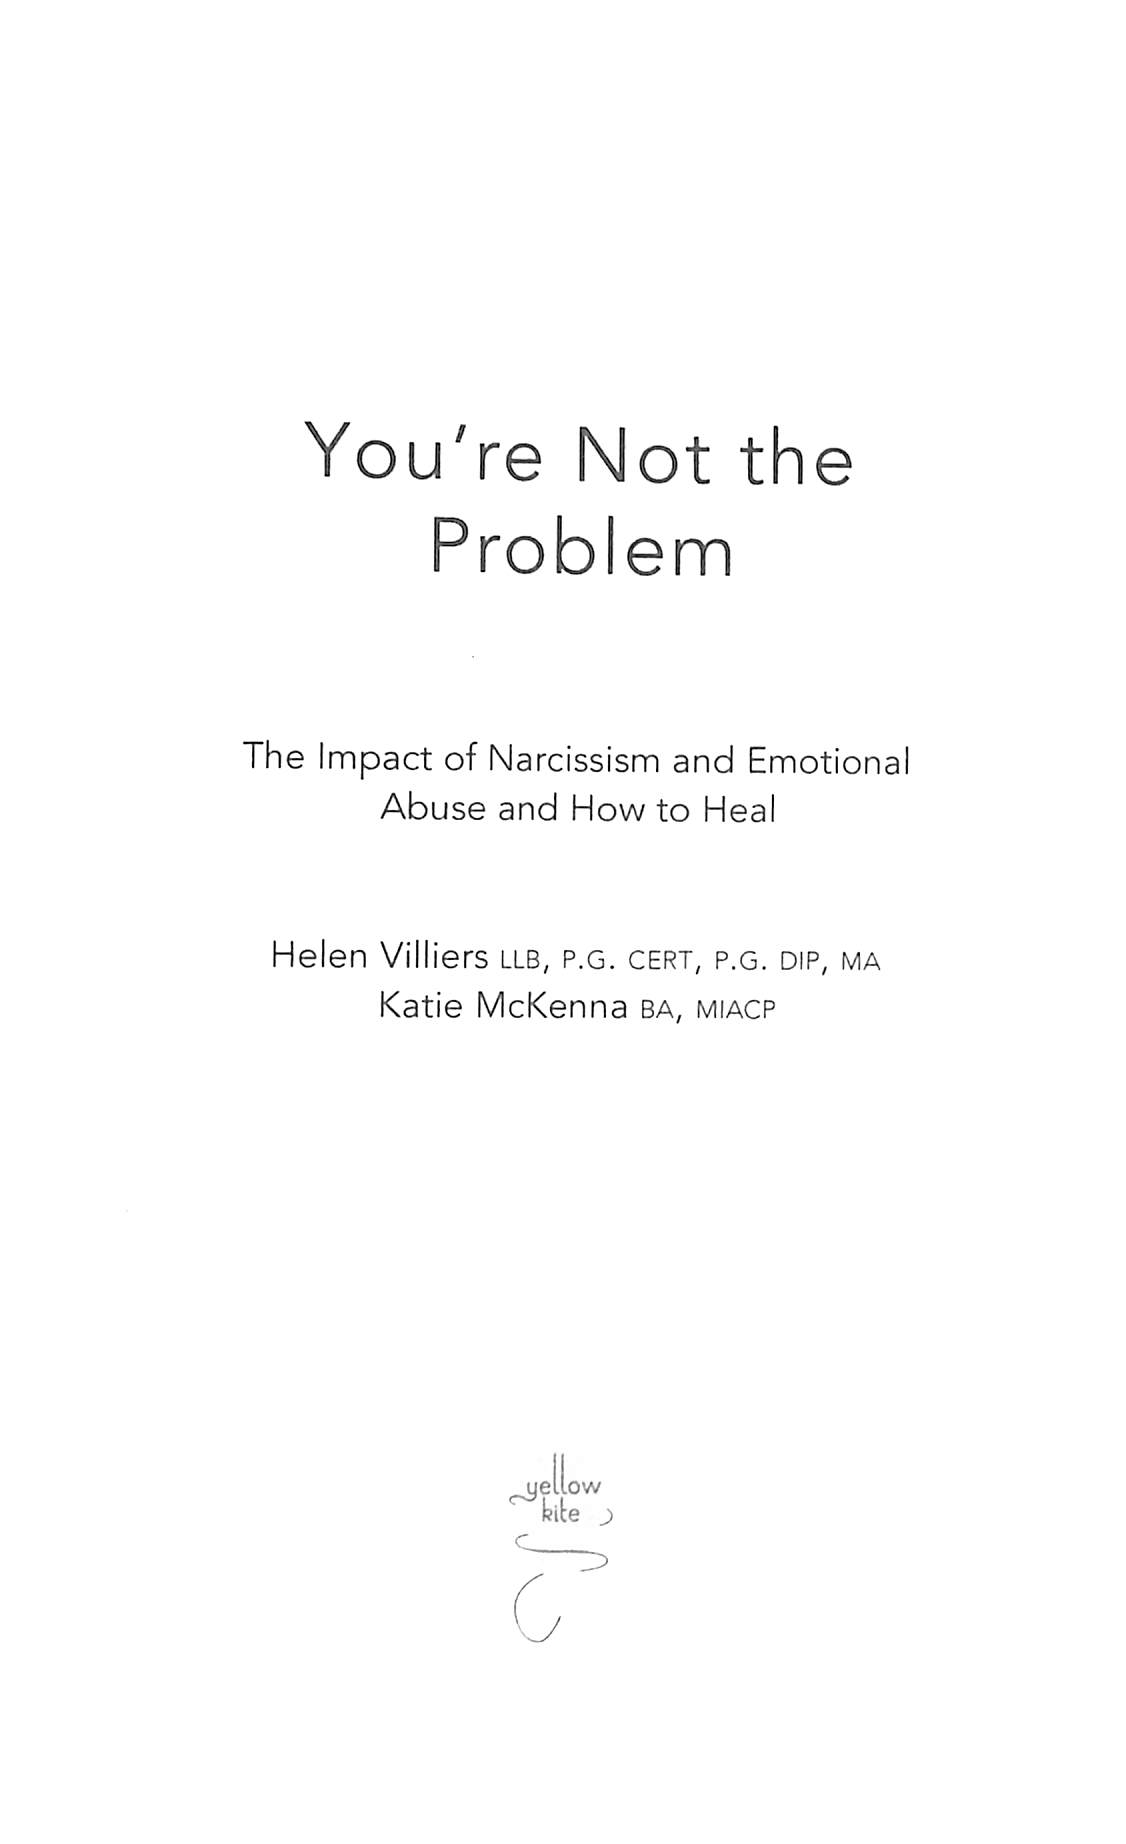 You're not the problem by Helen Villiers